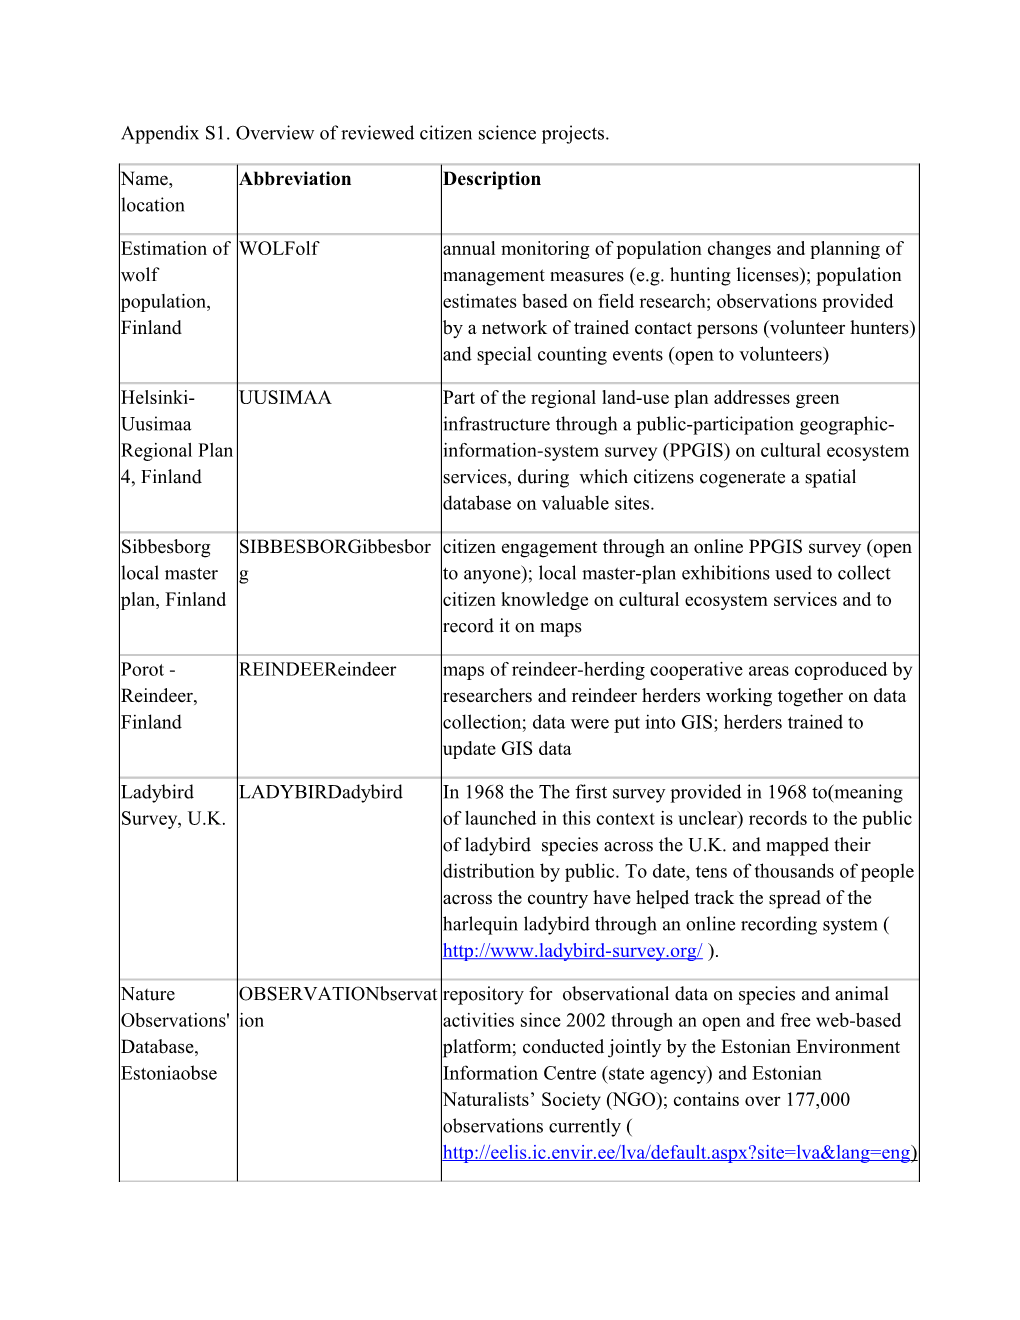 Appendix S1. Overview of Reviewed Citizen Science Projects